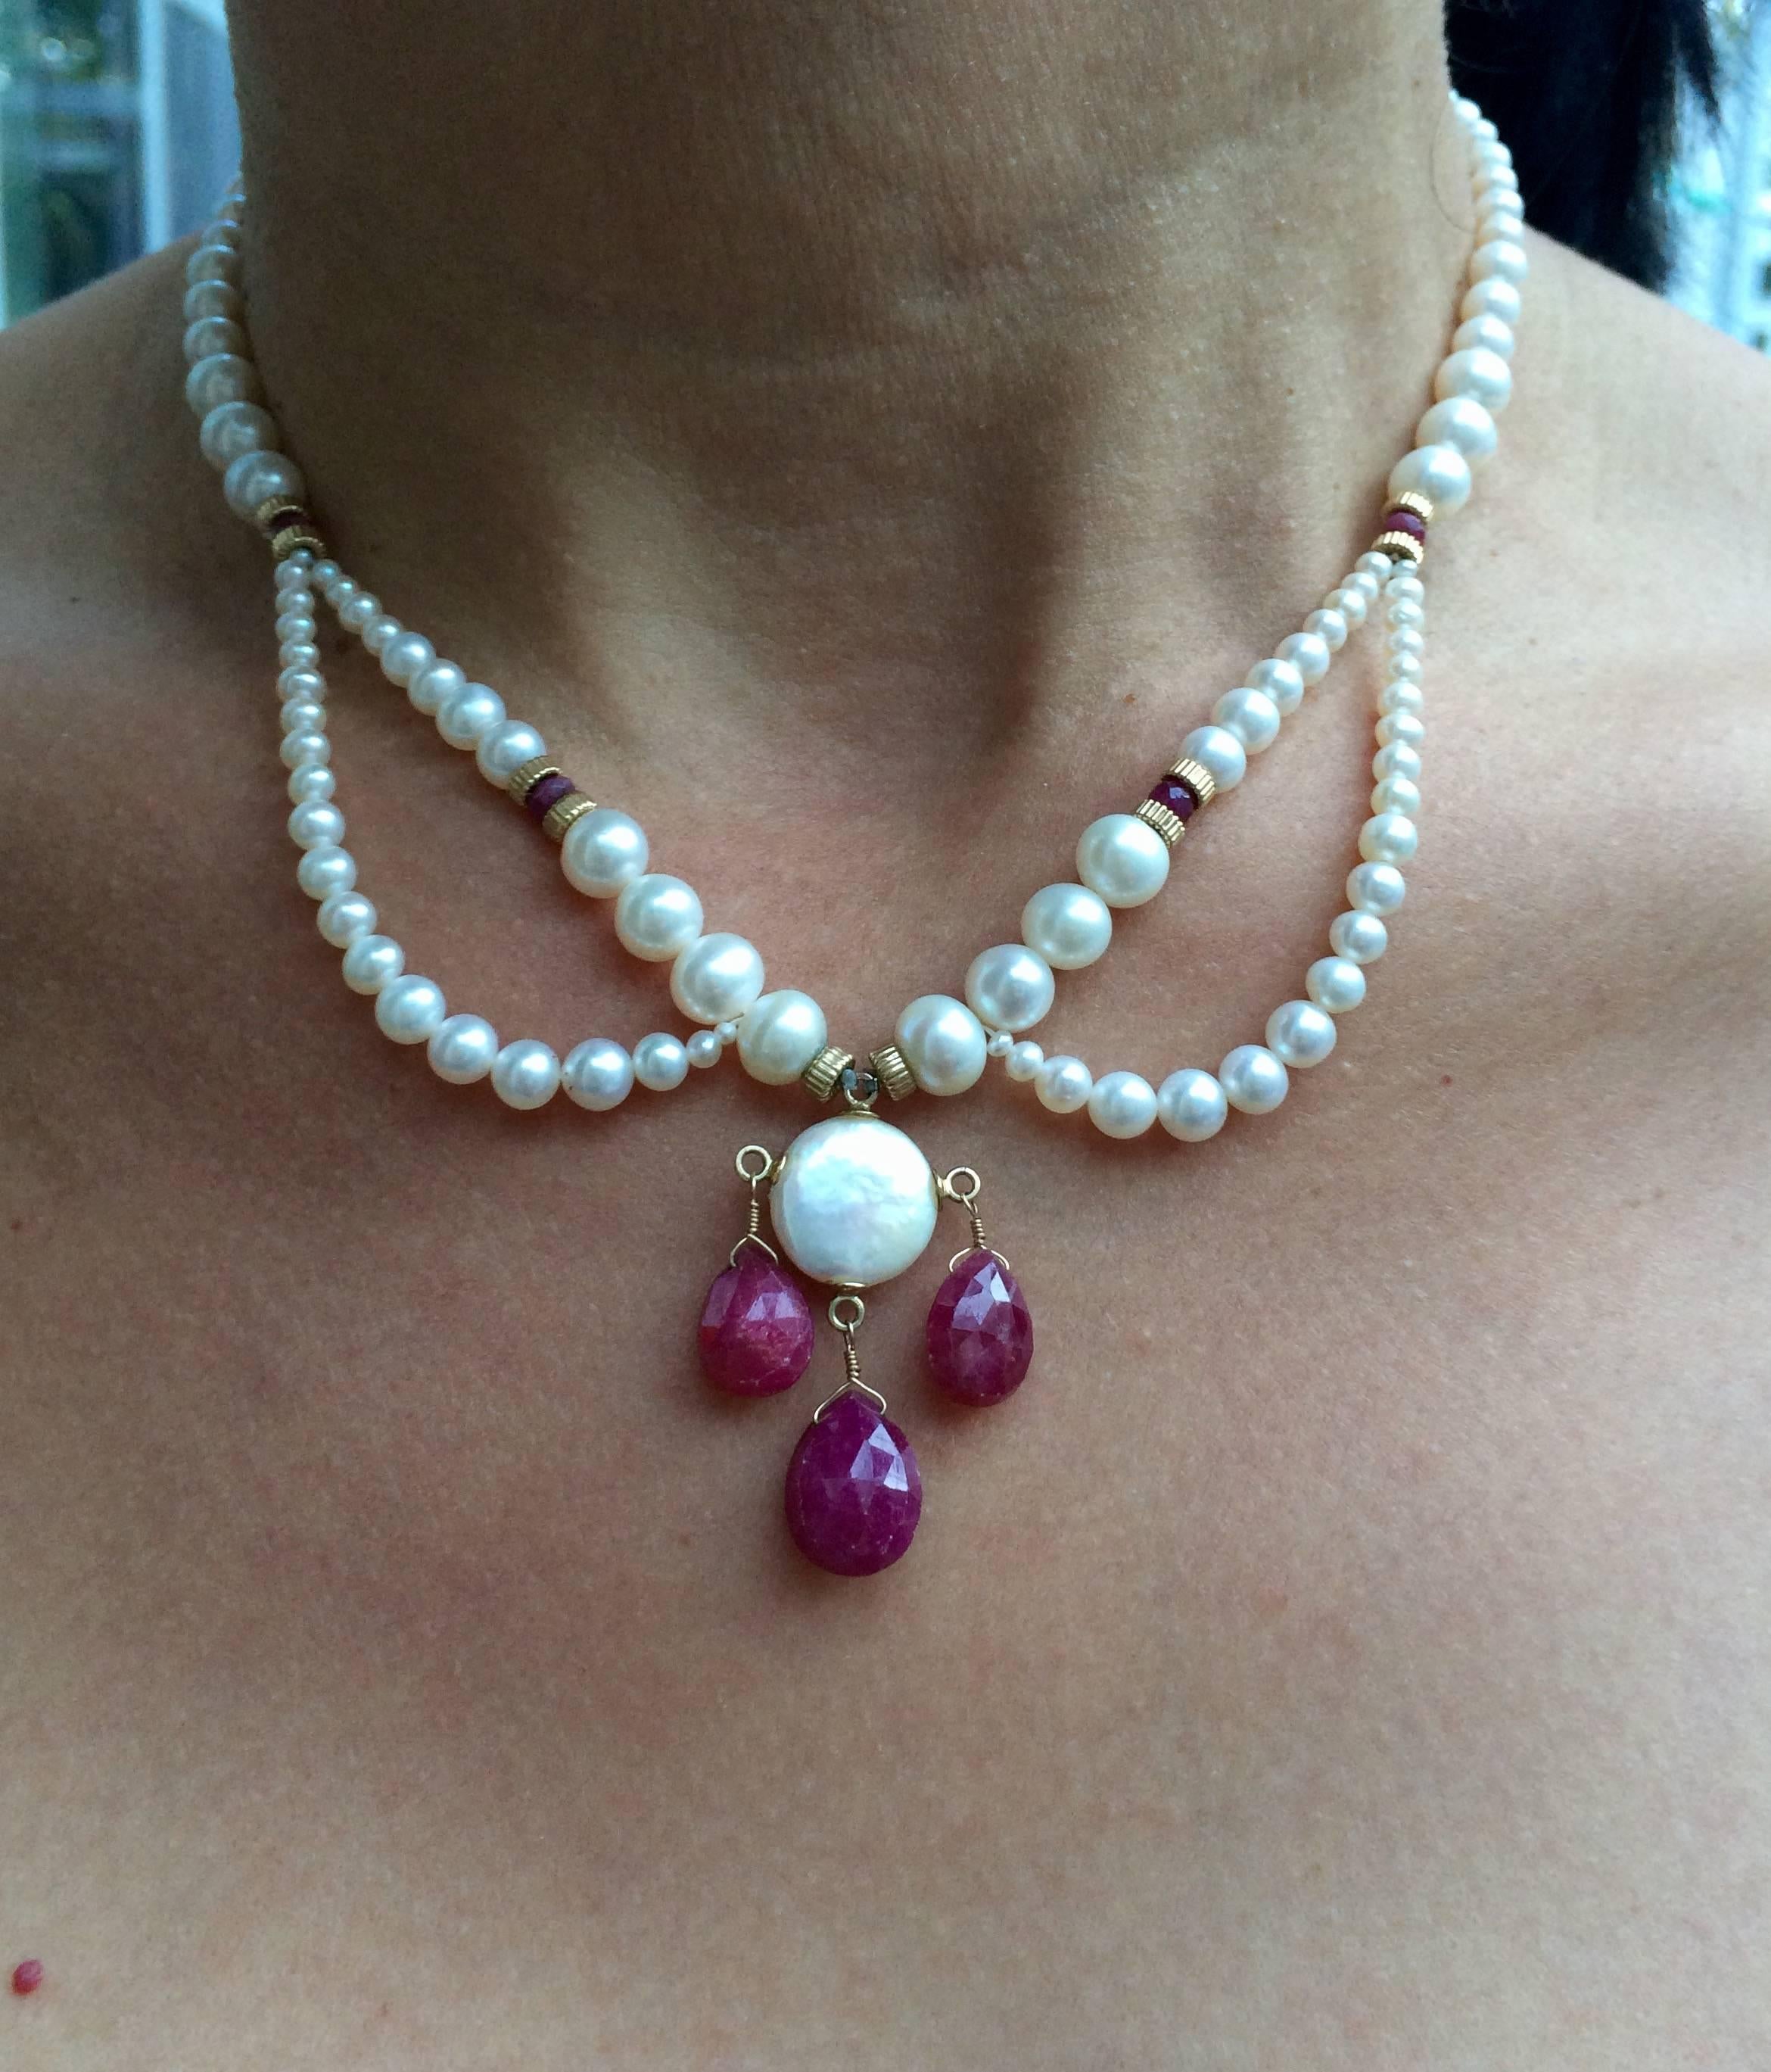 Graduated Pearl Draped Necklace with Ruby Briolettes , 14k gold clasp and beads 1